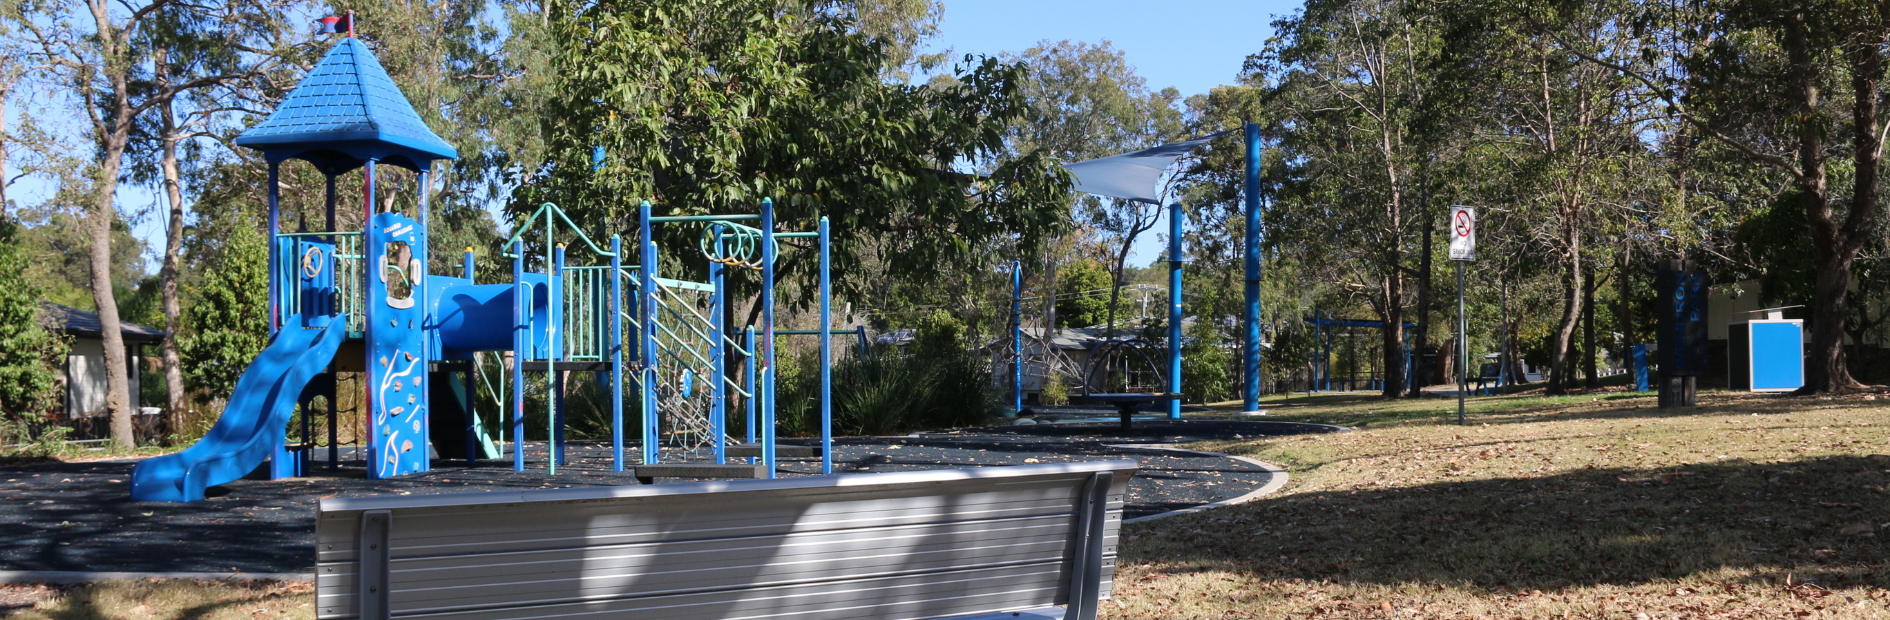 A public park bench with a blue Childrens' playground in the background.